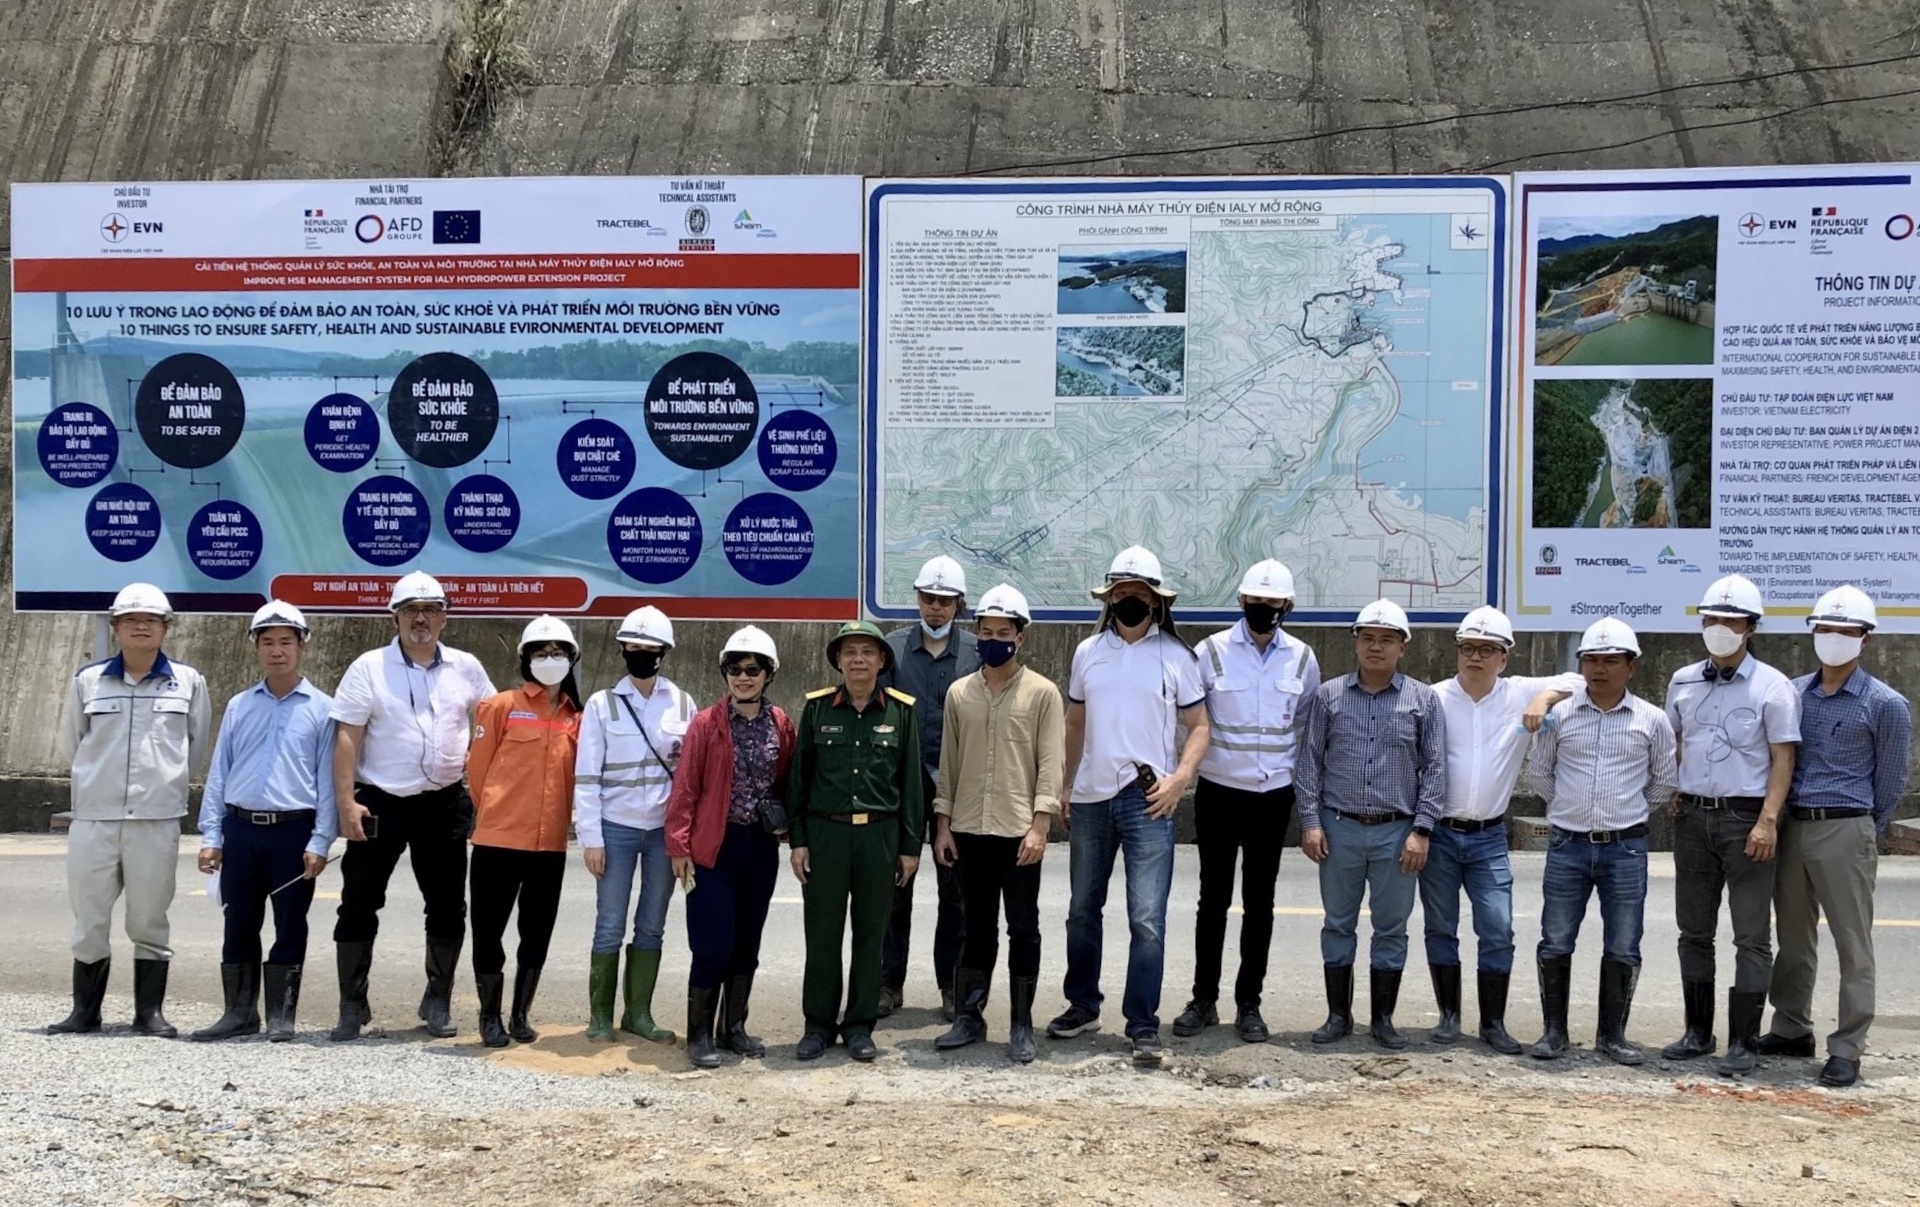 Promoting international collaboration for sustainable development of hydropower projects in Vietnam